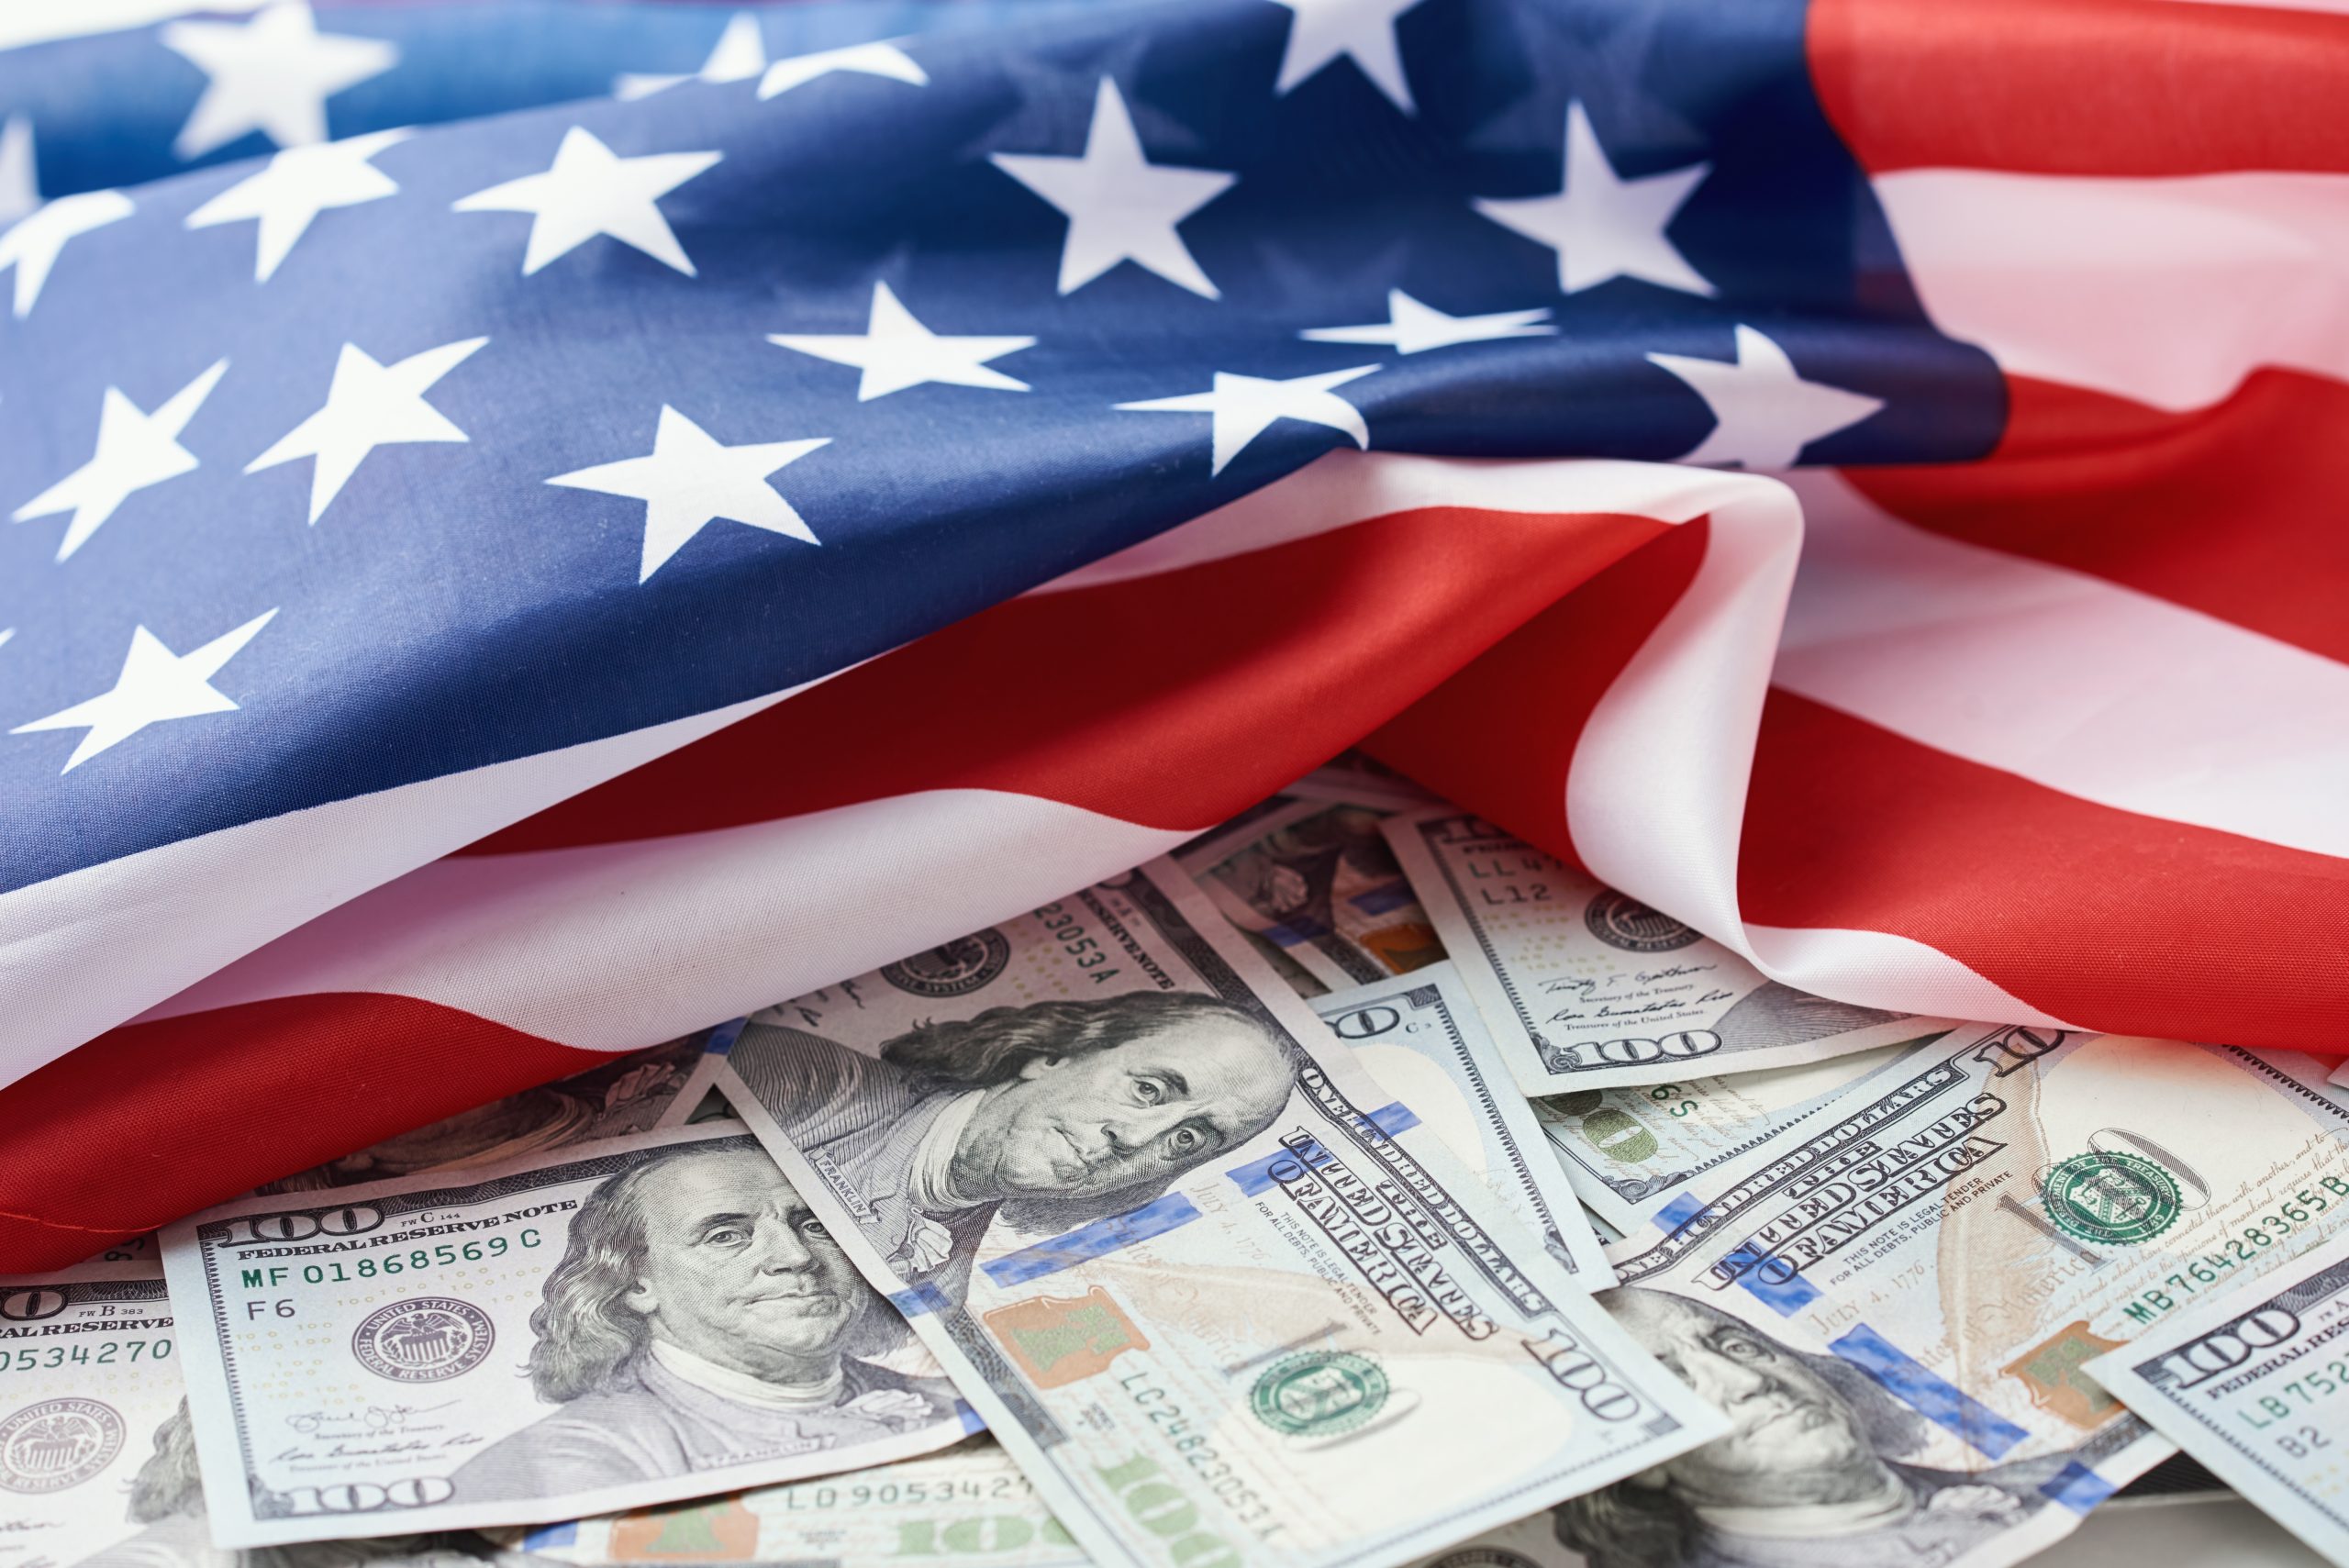 USA national flag and dollar bills. Business and finance concept